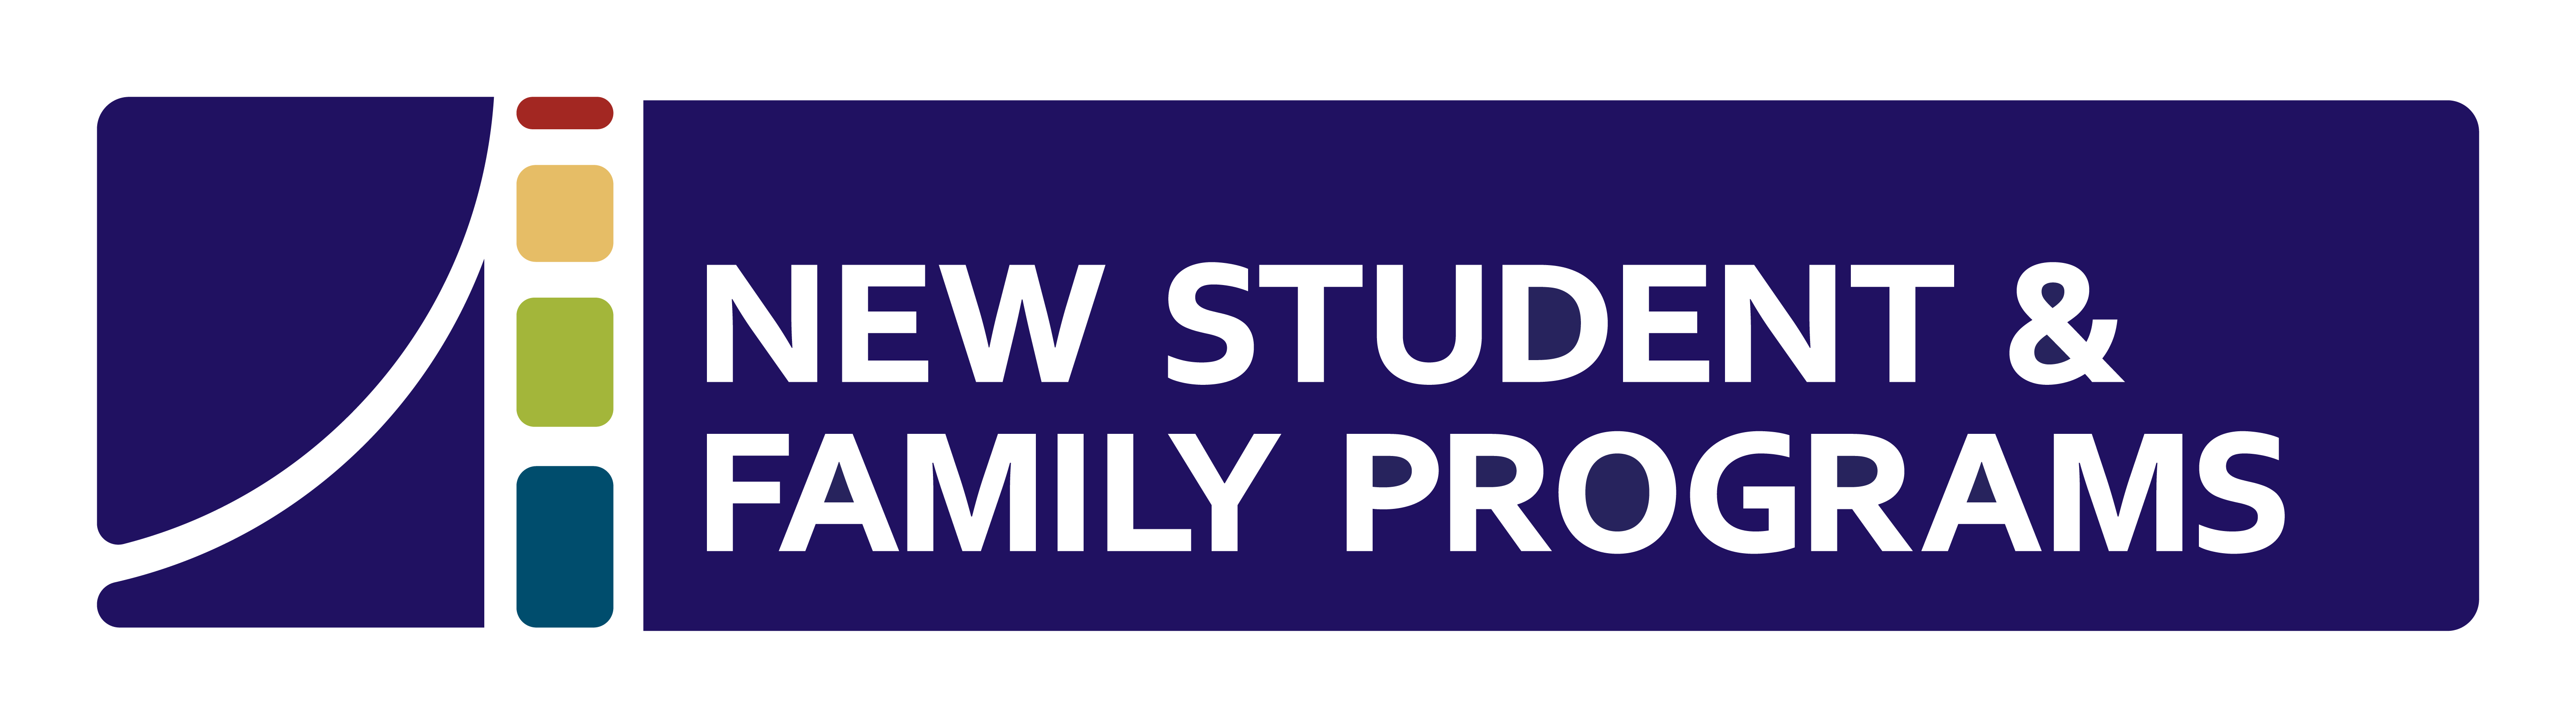 New Student and Family Programs logo banner